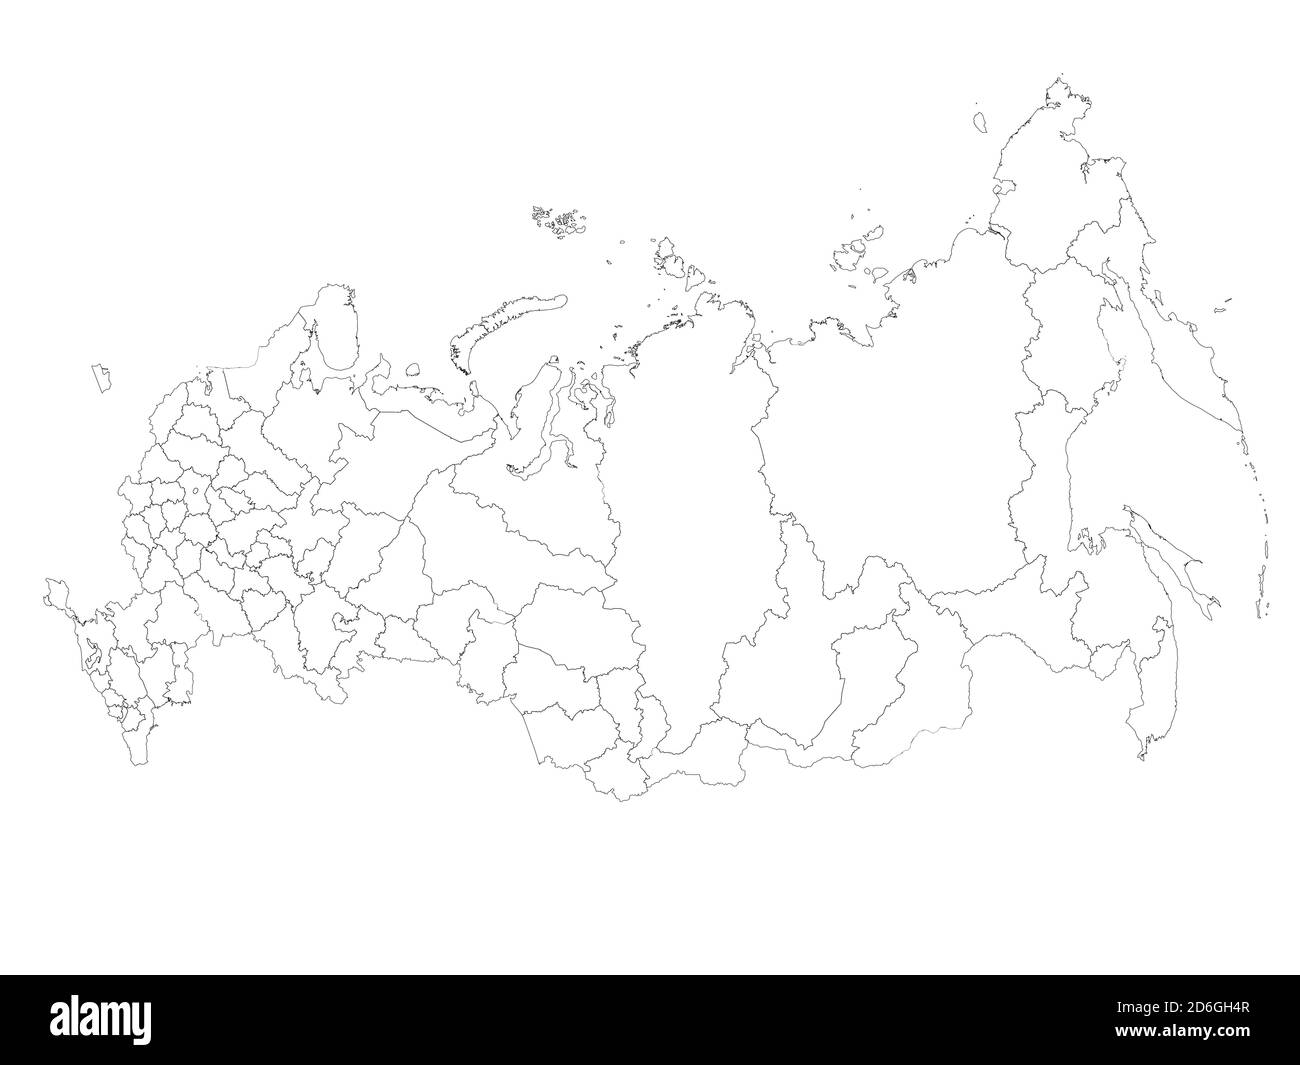 Blank political map of Russia, or Russian Federation. Federal subjects - republics, krays, oblasts, cities of federal significance, autonomous oblasts and autonomous okrugs. Simple black outline vector map. Stock Vector